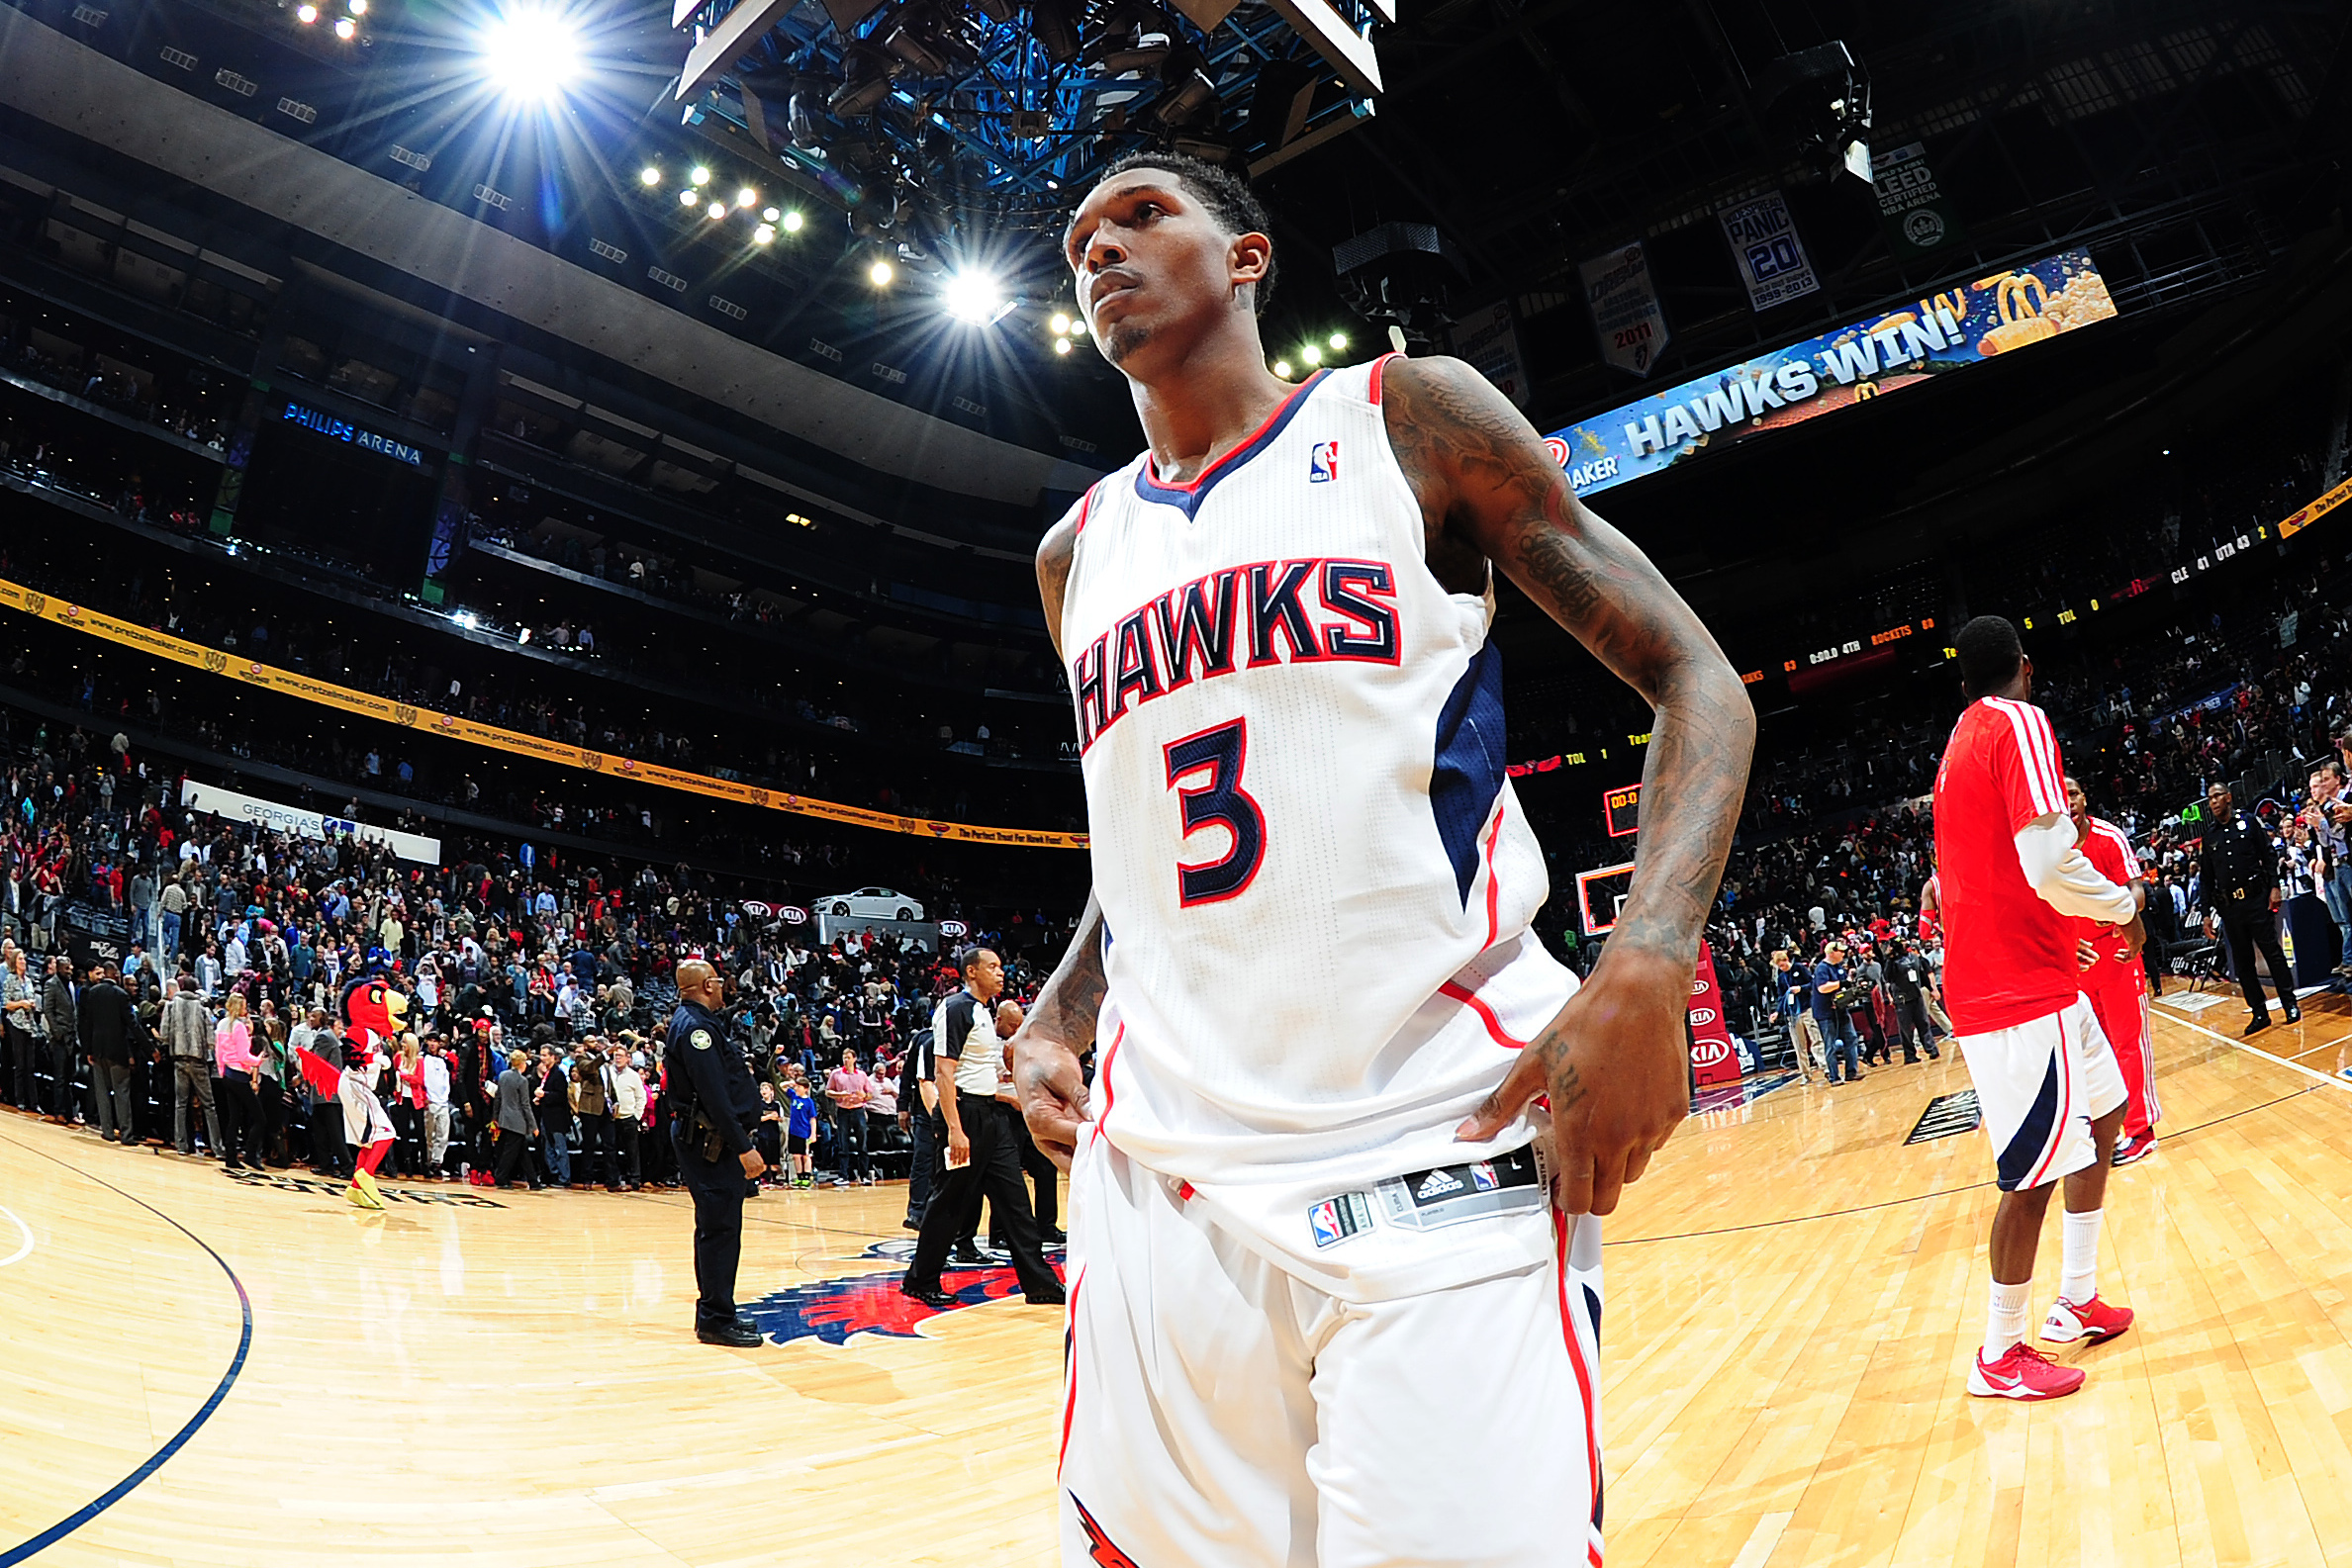 Report: Lou Williams looking for multi-year deal, has interest in returning  to Hawks - Peachtree Hoops